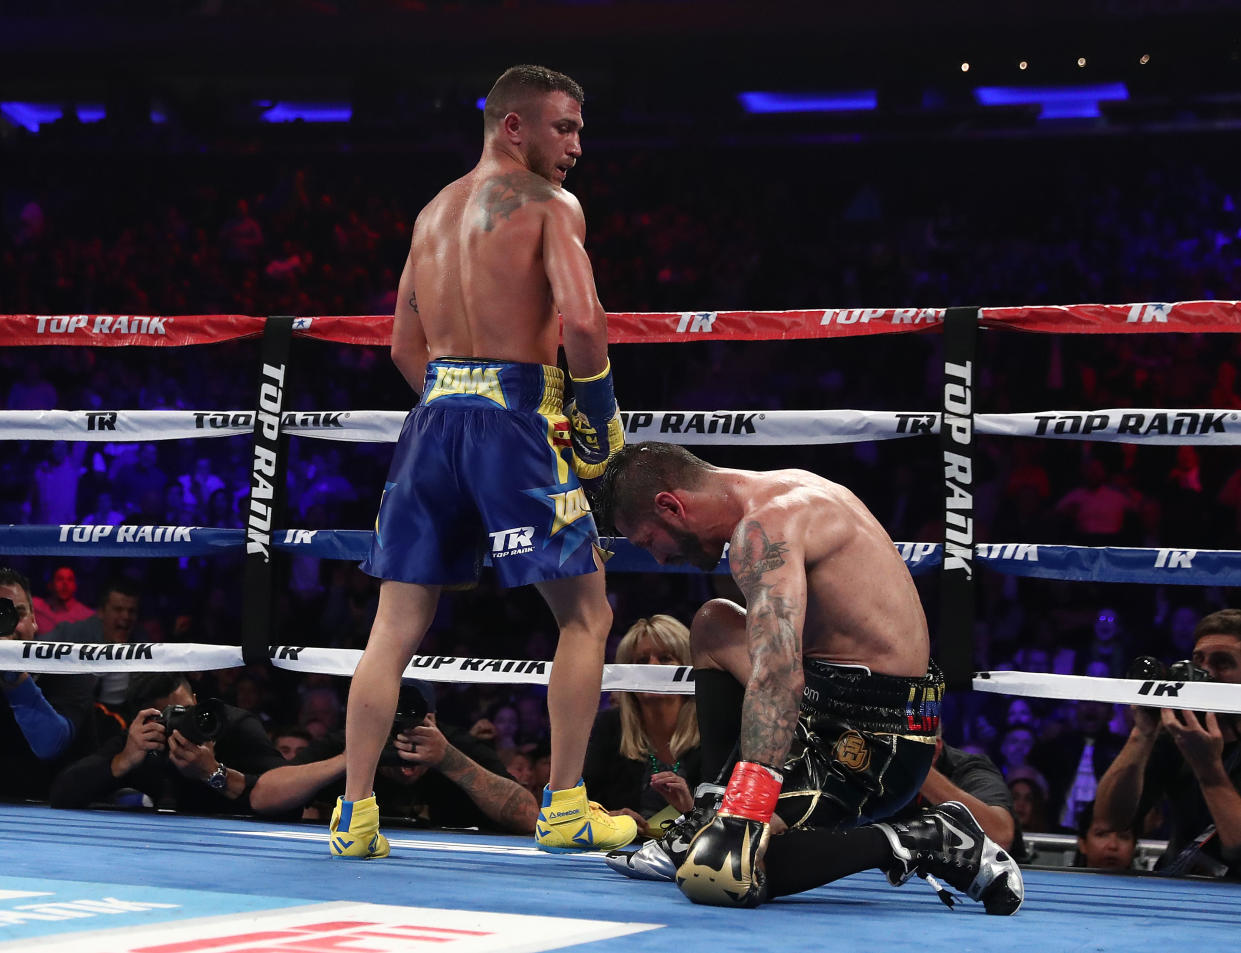 Vasiliy Lomachenko knocks down Jorge Linares in the tenth round during their WBA lightweight title fight at Madison Square Garden on May 12, 2018 in New York City. (Getty Images)